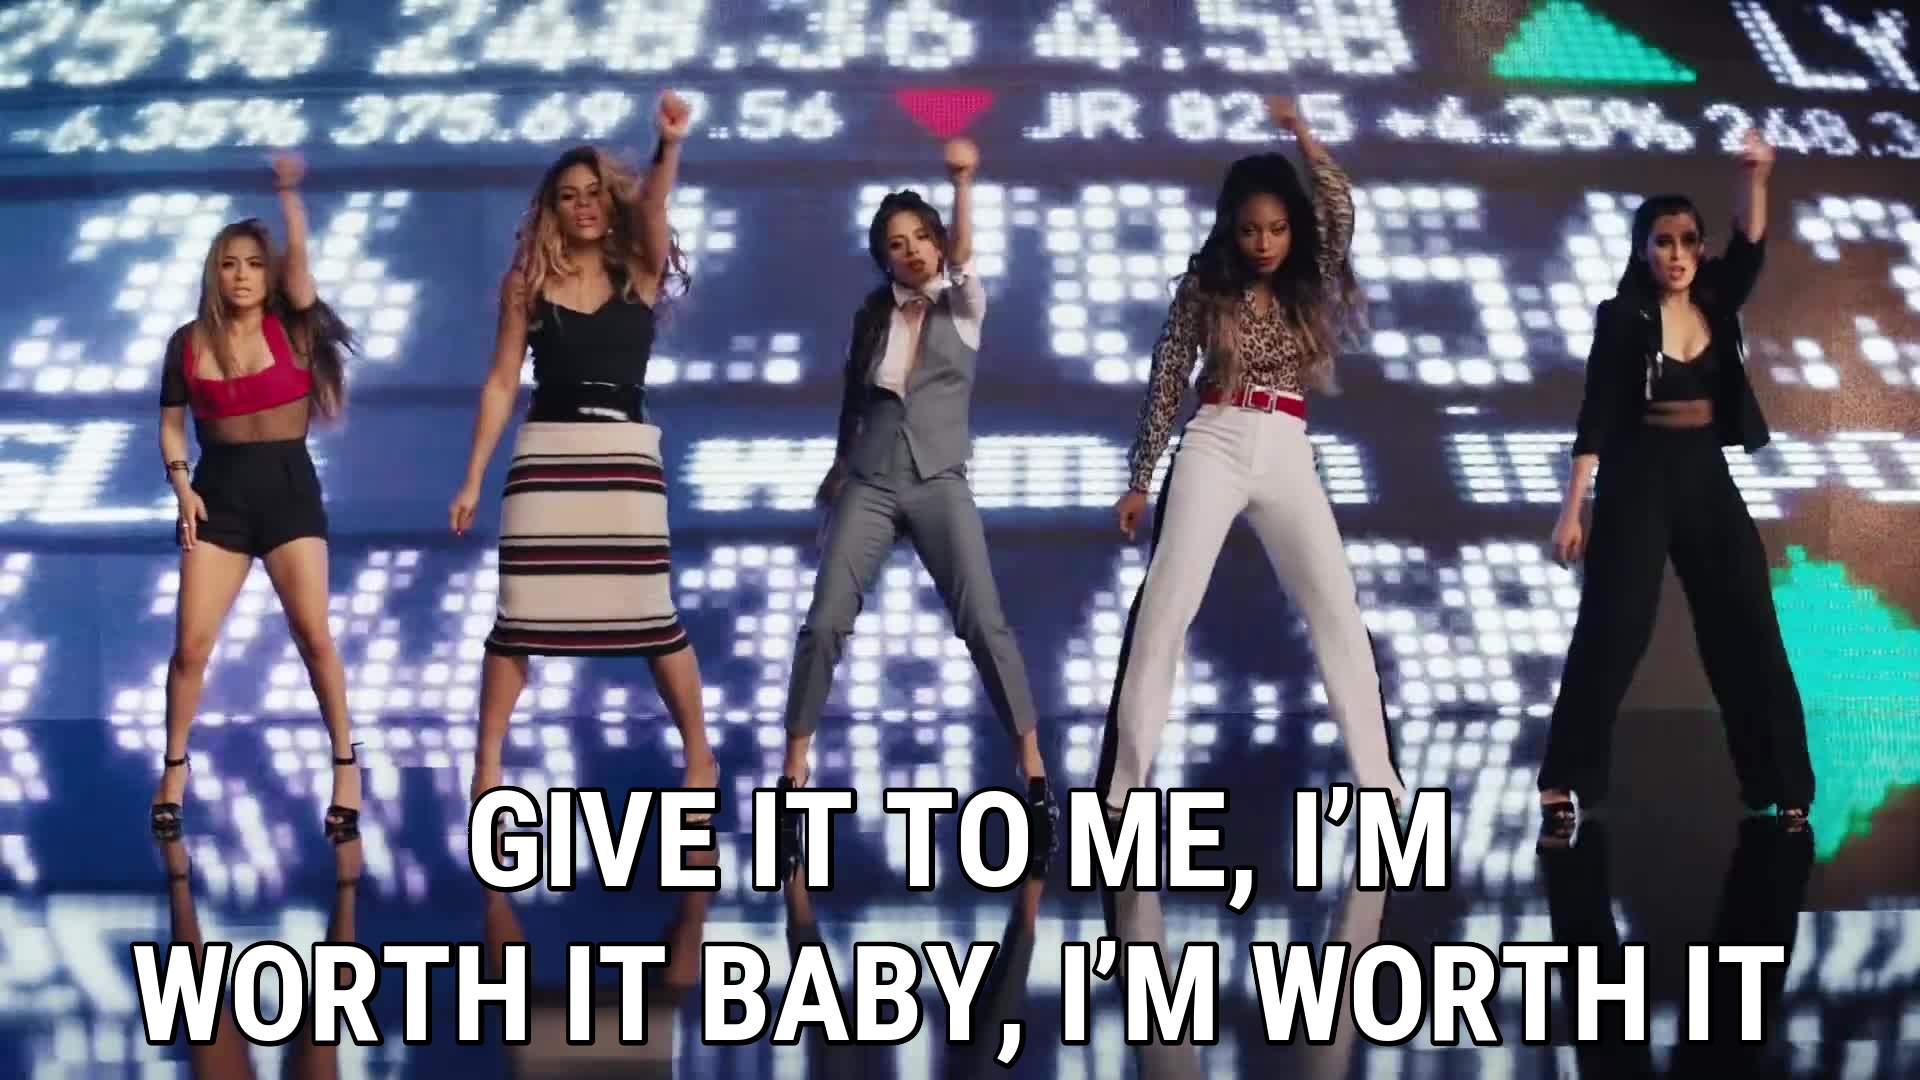 Worth it by fifth harmonylisten to fifth harmony.